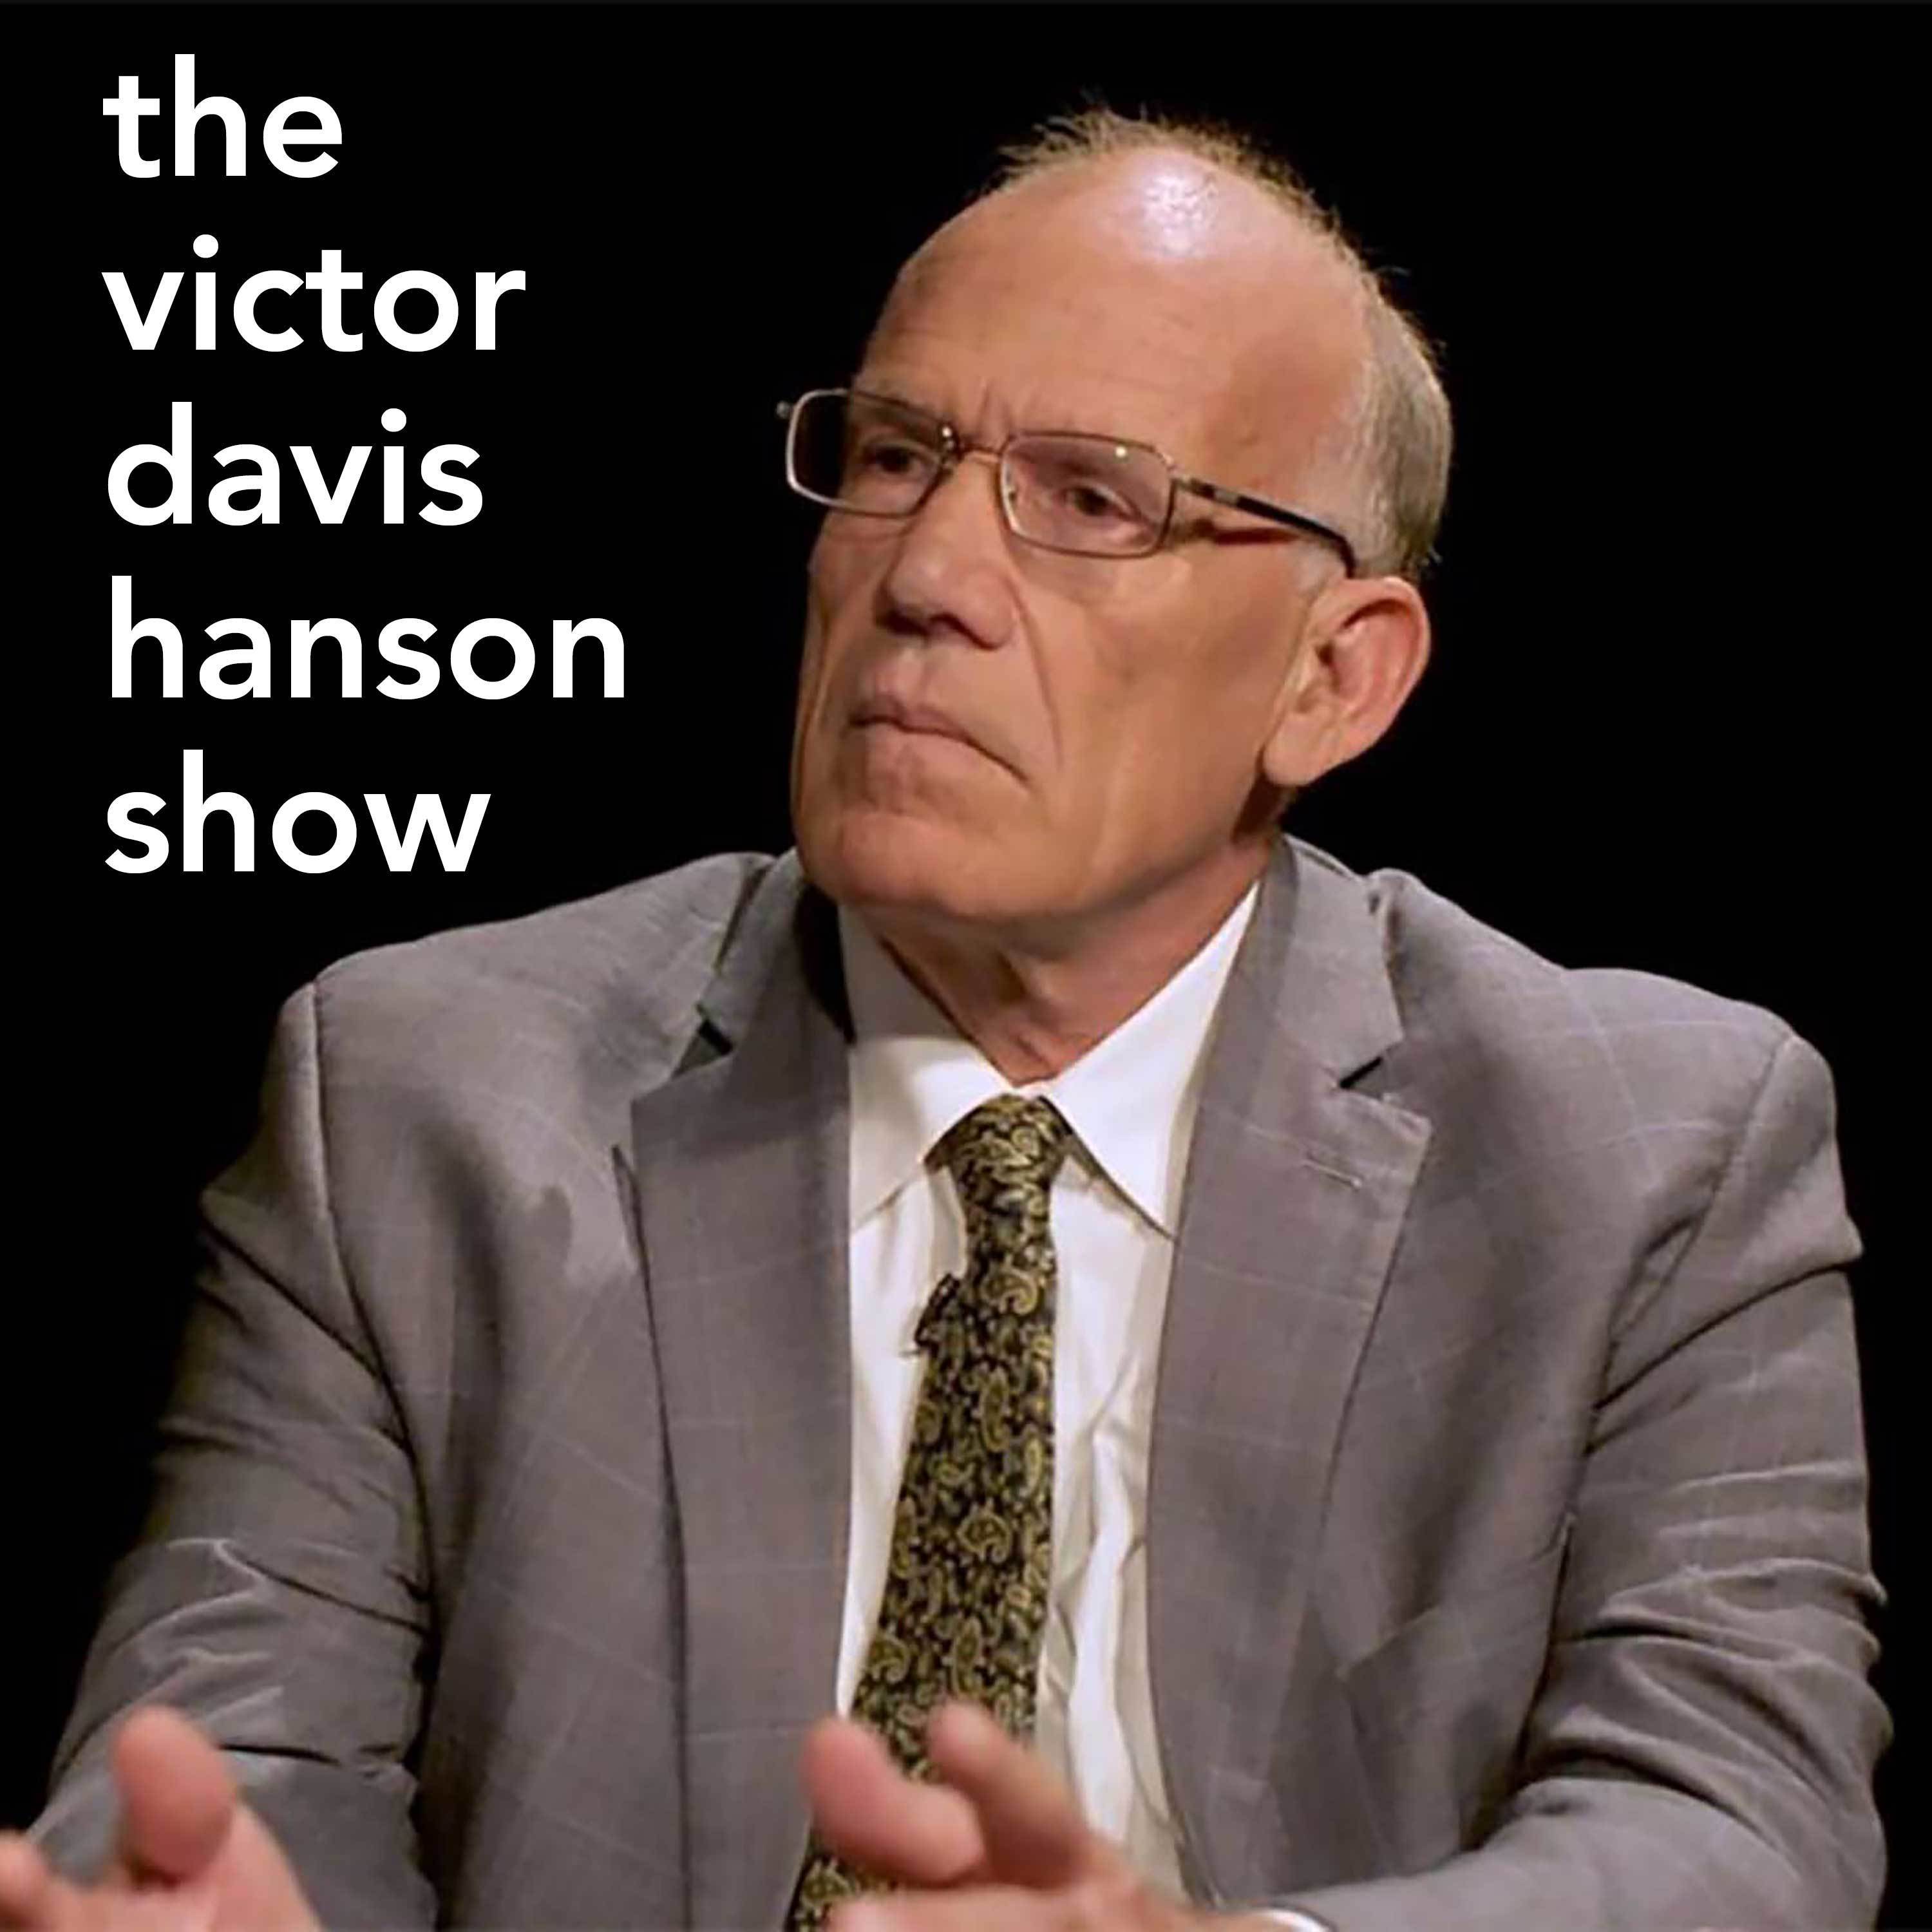 Women Politicians and Education : Join Victor Davis Hanson and cohost Jack Fowler discuss KJP defending Biden, Michelle Obama a 2024 candidate (?), Newsom inching to candidacy, Kamala Harris’ record, our budget crisis, and inner-city school crisis.See Privacy Policy at https://art19.com/privacy and California Privacy Notice at https://art19.com/privacy#do-not-sell-my-info.